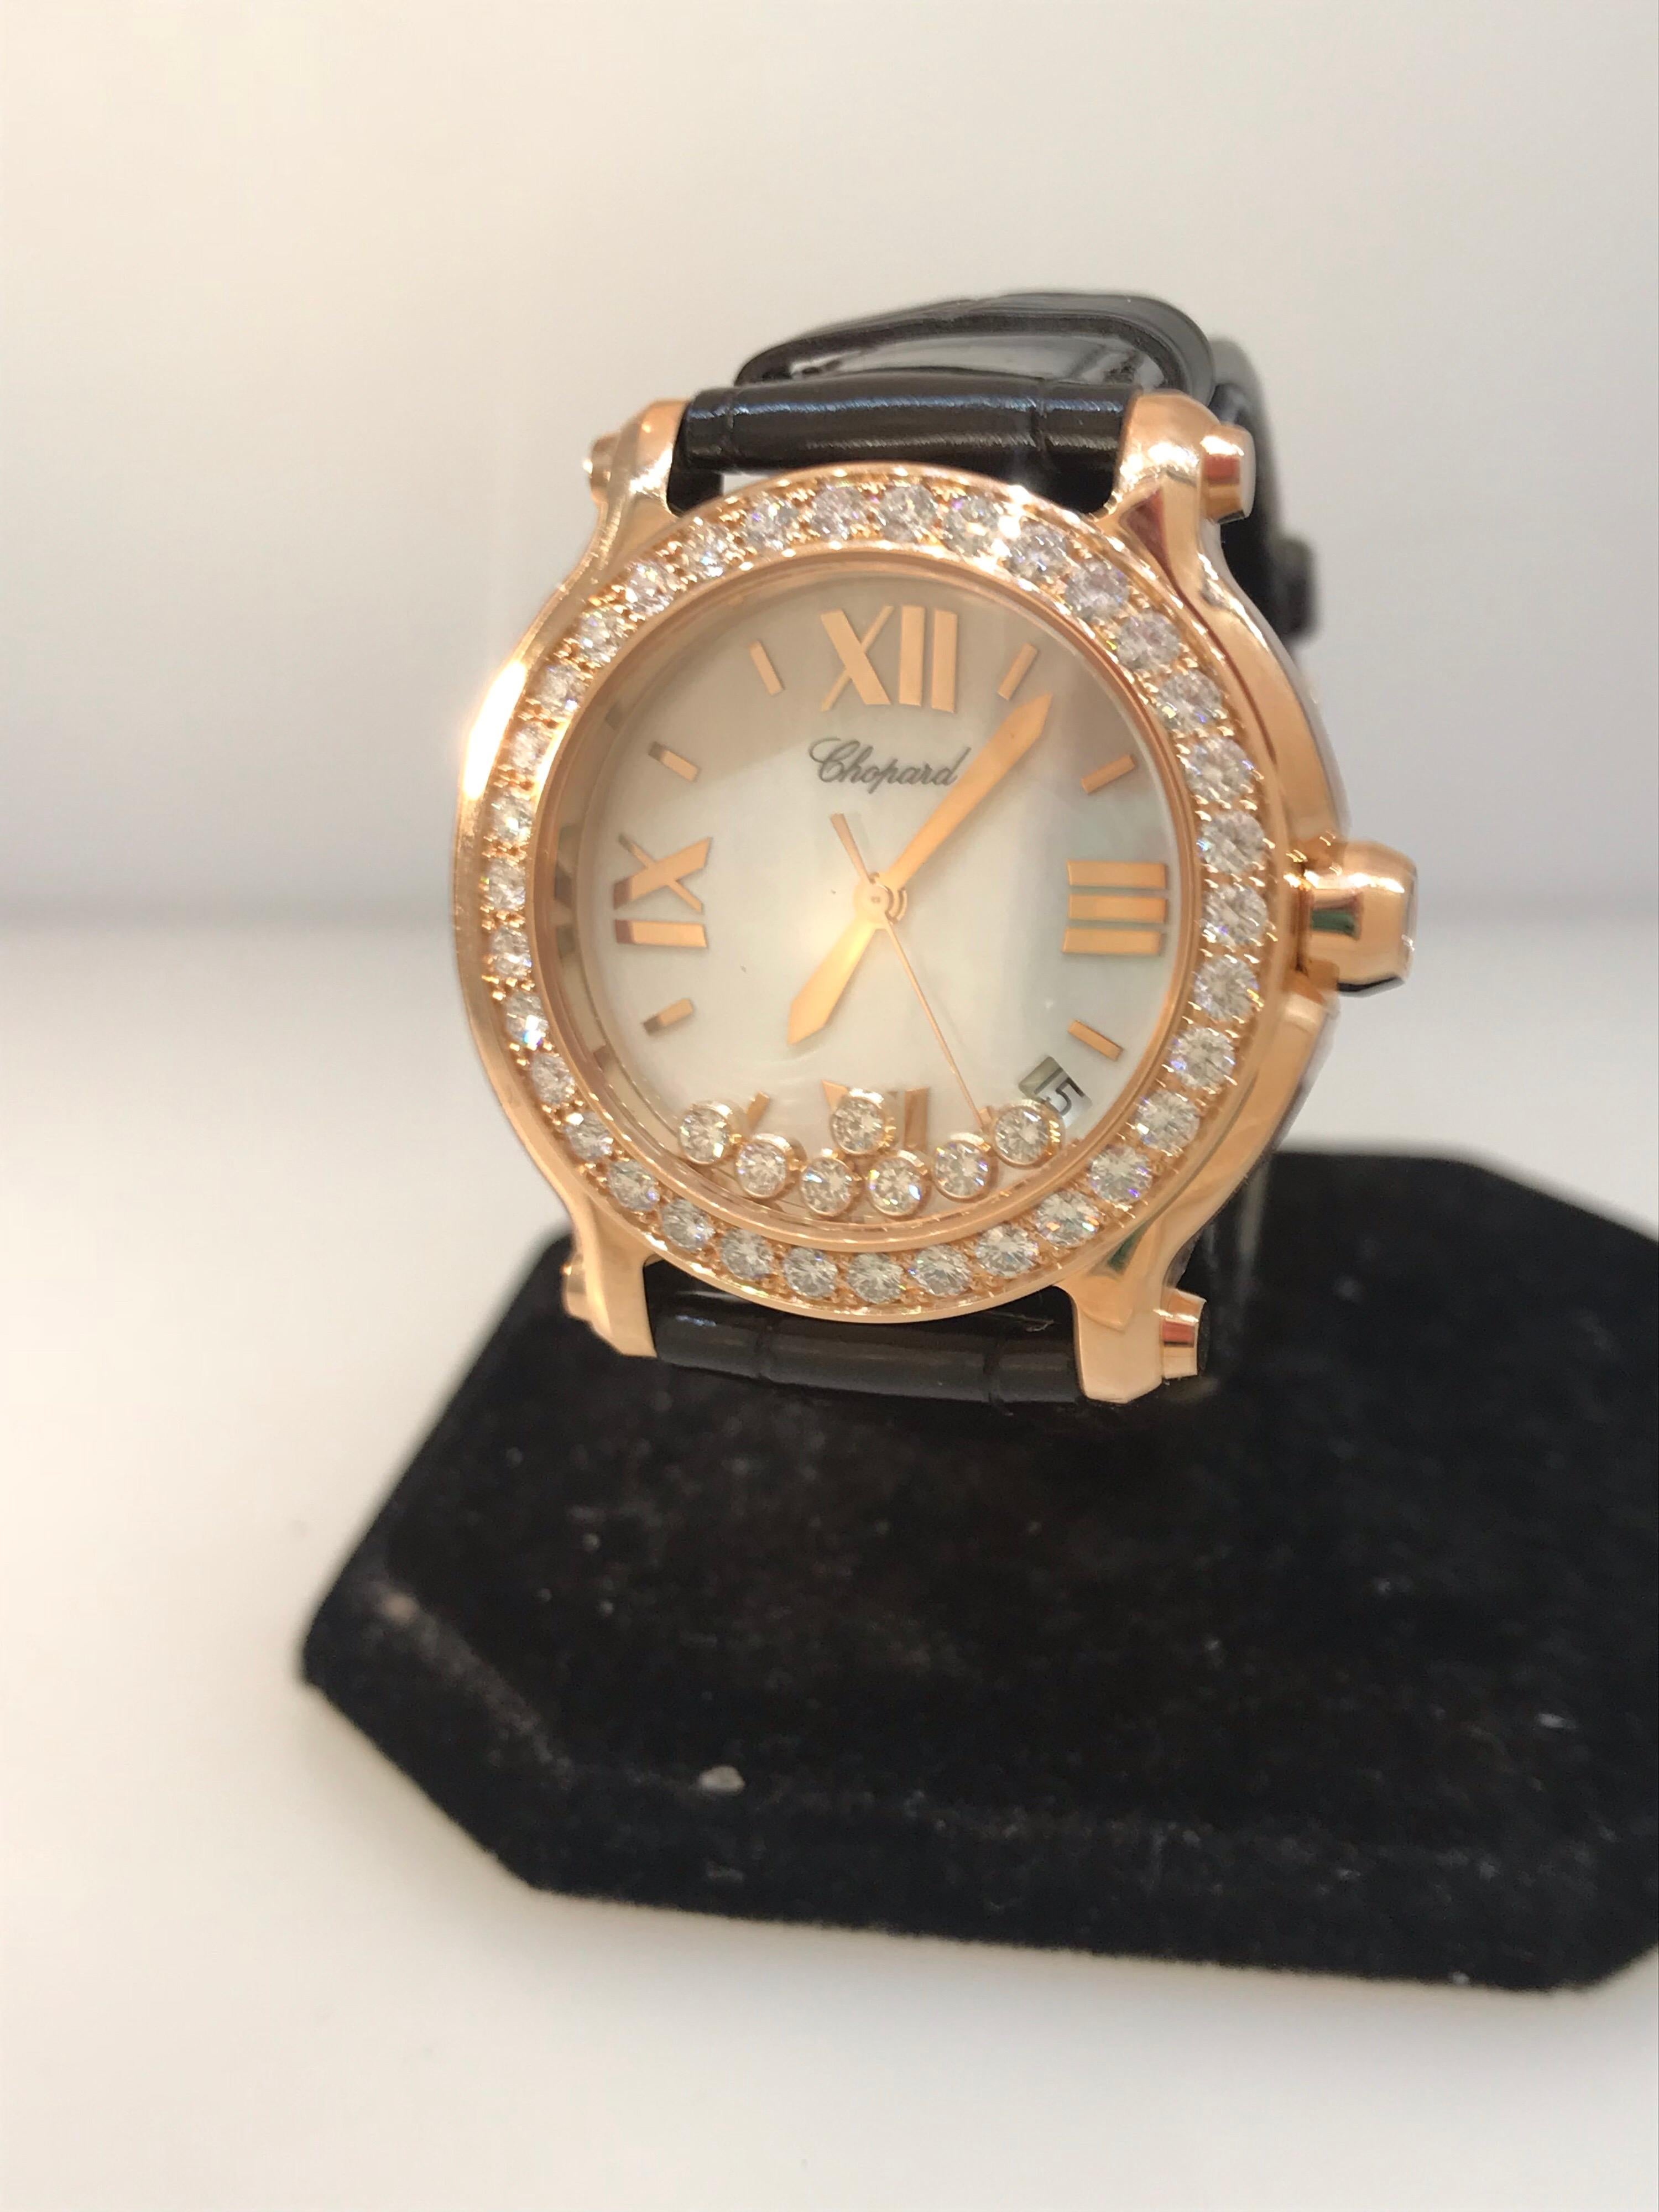 Chopard Happy Sport Ladies Watch

Model Number: 27/7473-5002

100% Authentic

Brand New

Comes with original Chopard box, certificate of authenticity and warranty and instruction manual

18 Karat Rose Gold Case (68.50gr)

Scratch Resistant Sapphire